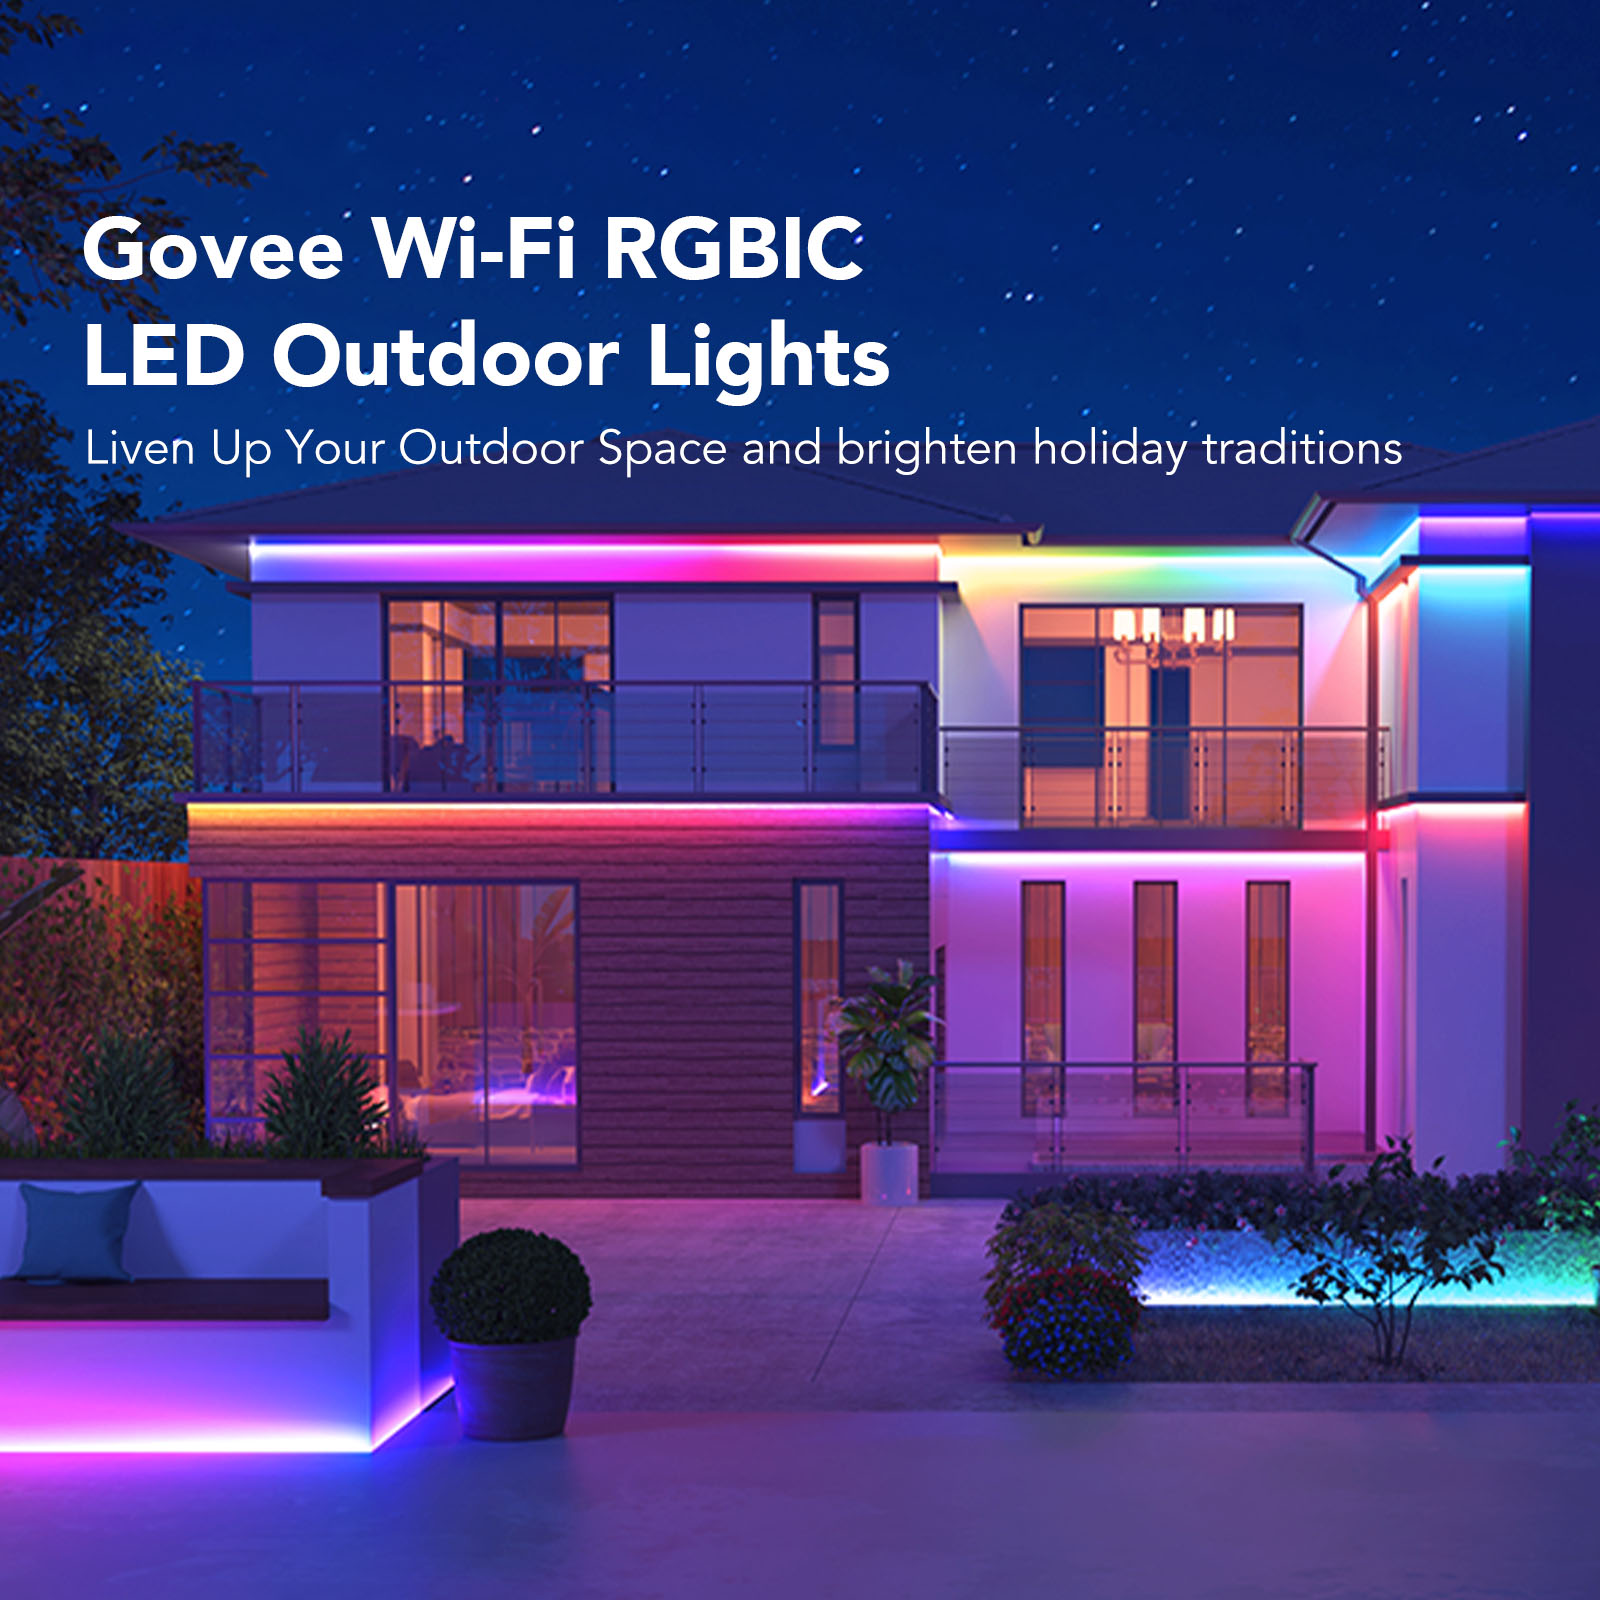 Govee 32.8ft Outdoor LED RGBIC Strip Lights - Color Changing, Dimmable,  Wi-Fi & Bluetooth Enabled, IP65 Waterproof, ETL Listed